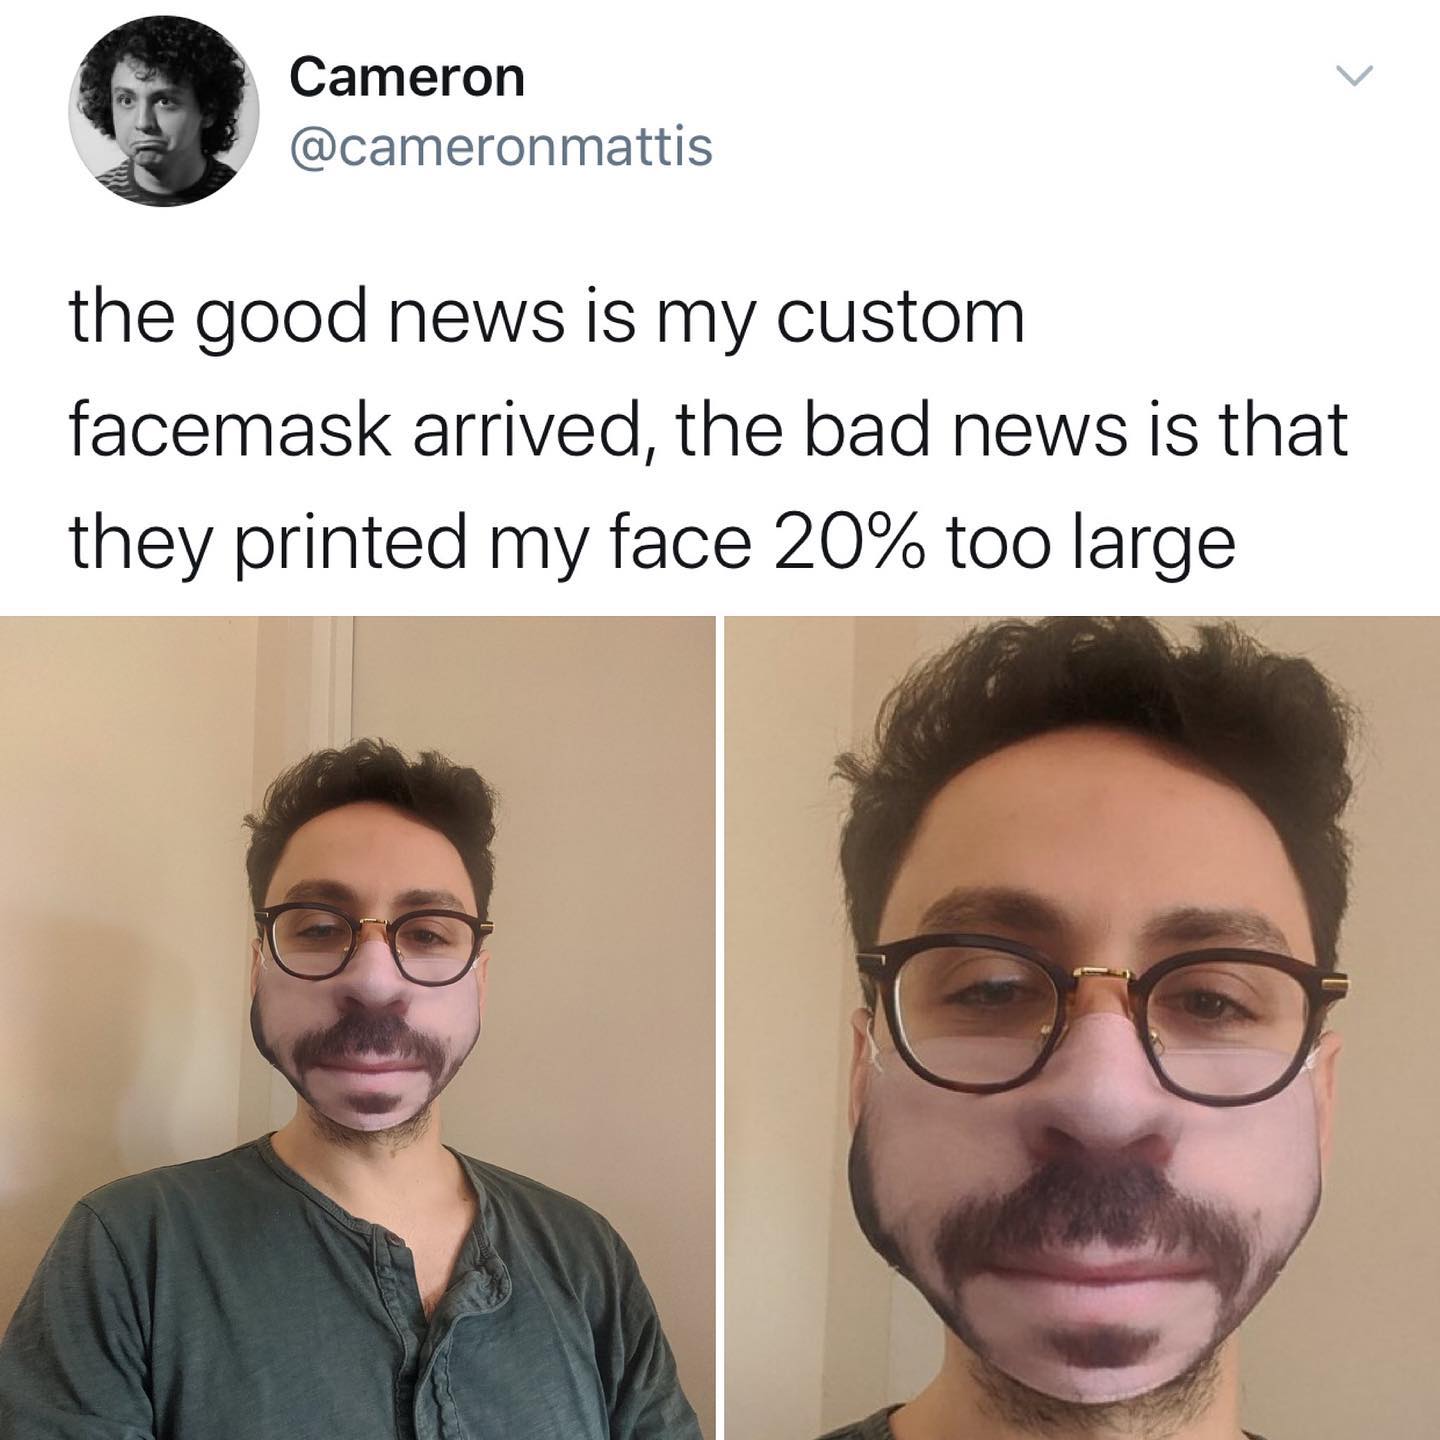 dank memes - twitter - custom face mask fails - v Cameron the good news is my custom facemask arrived, the bad news is that they printed my face 20% too large